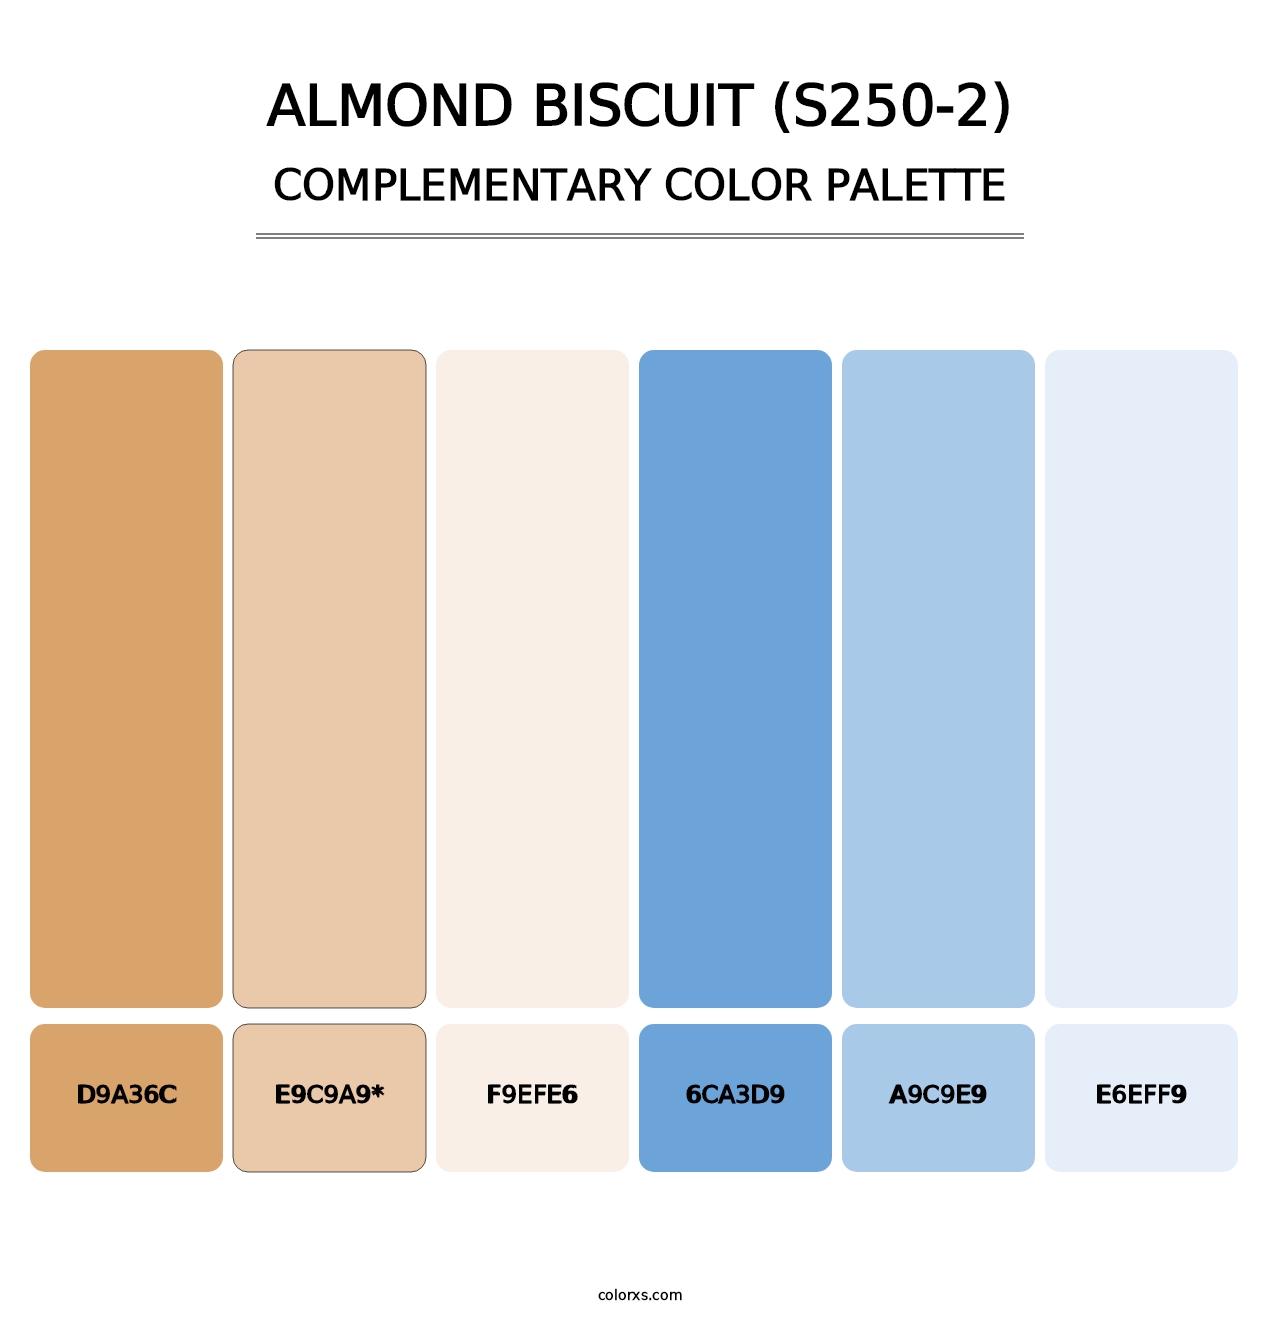 Almond Biscuit (S250-2) - Complementary Color Palette